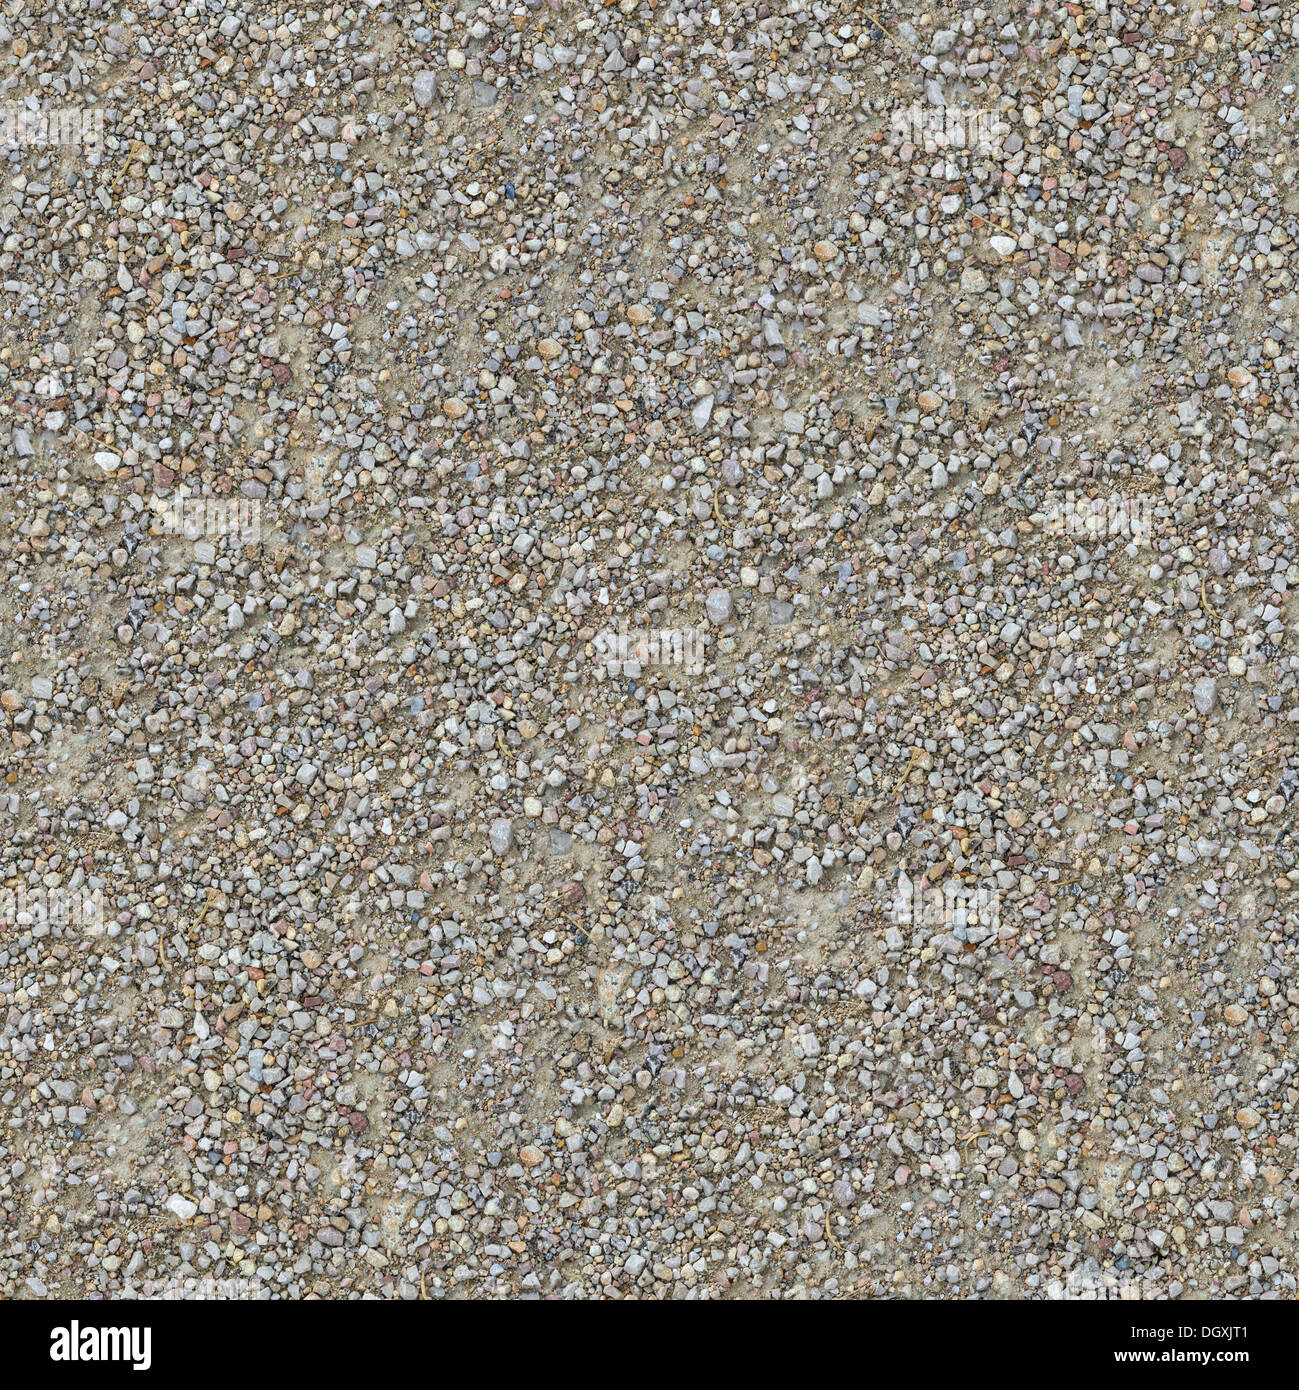 Seamless Texture of Gravel Country Road. Stock Photo